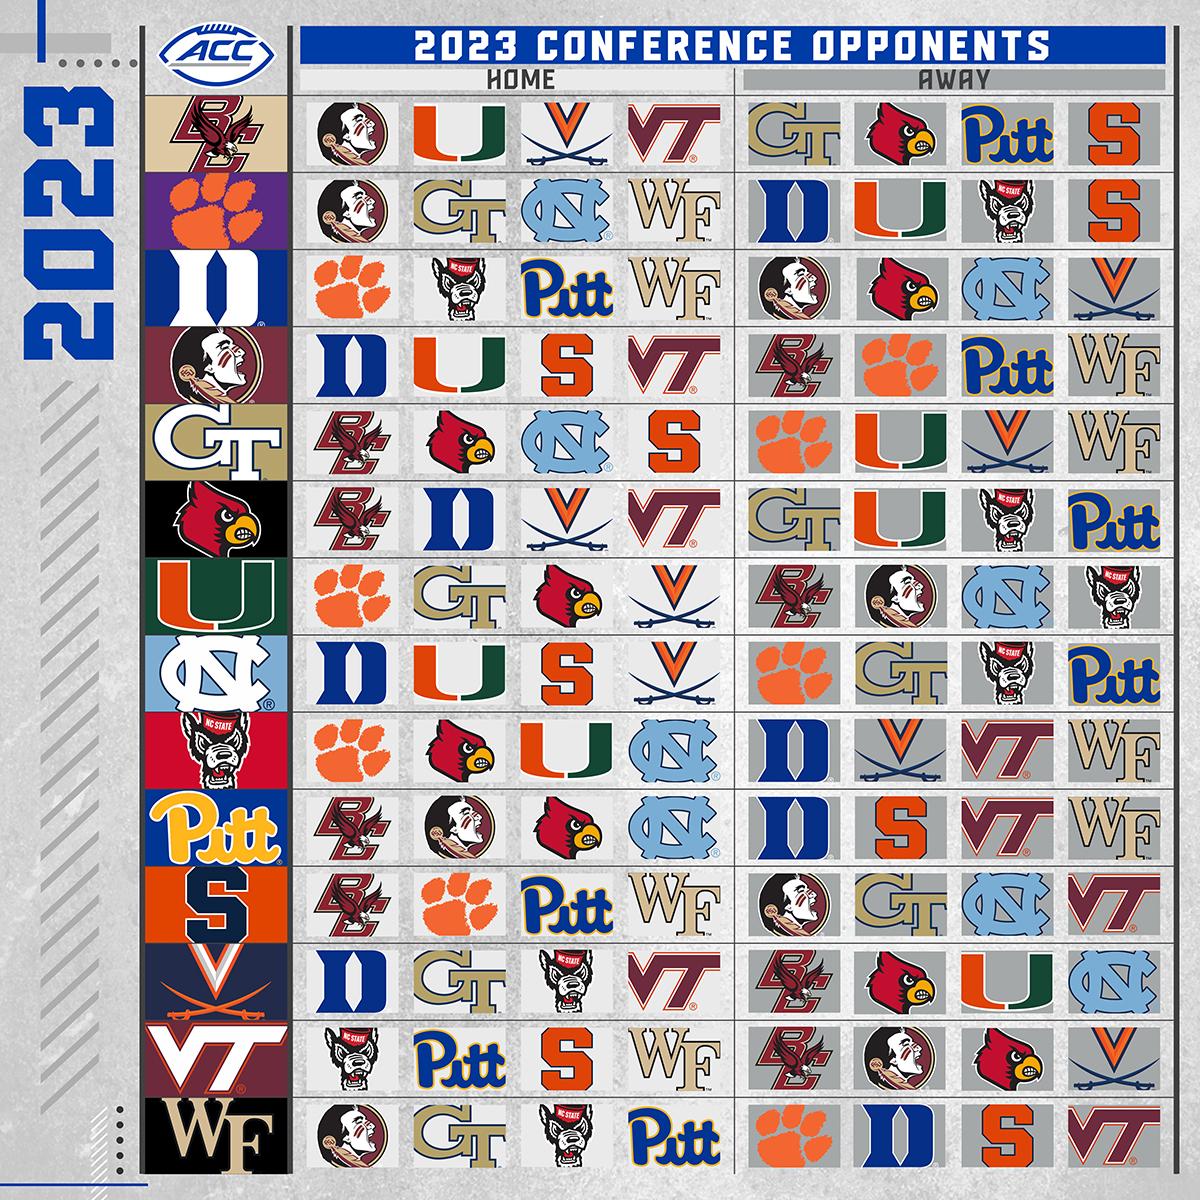 ACC Announces Football Schedule Model for 202326 Clemson Tigers